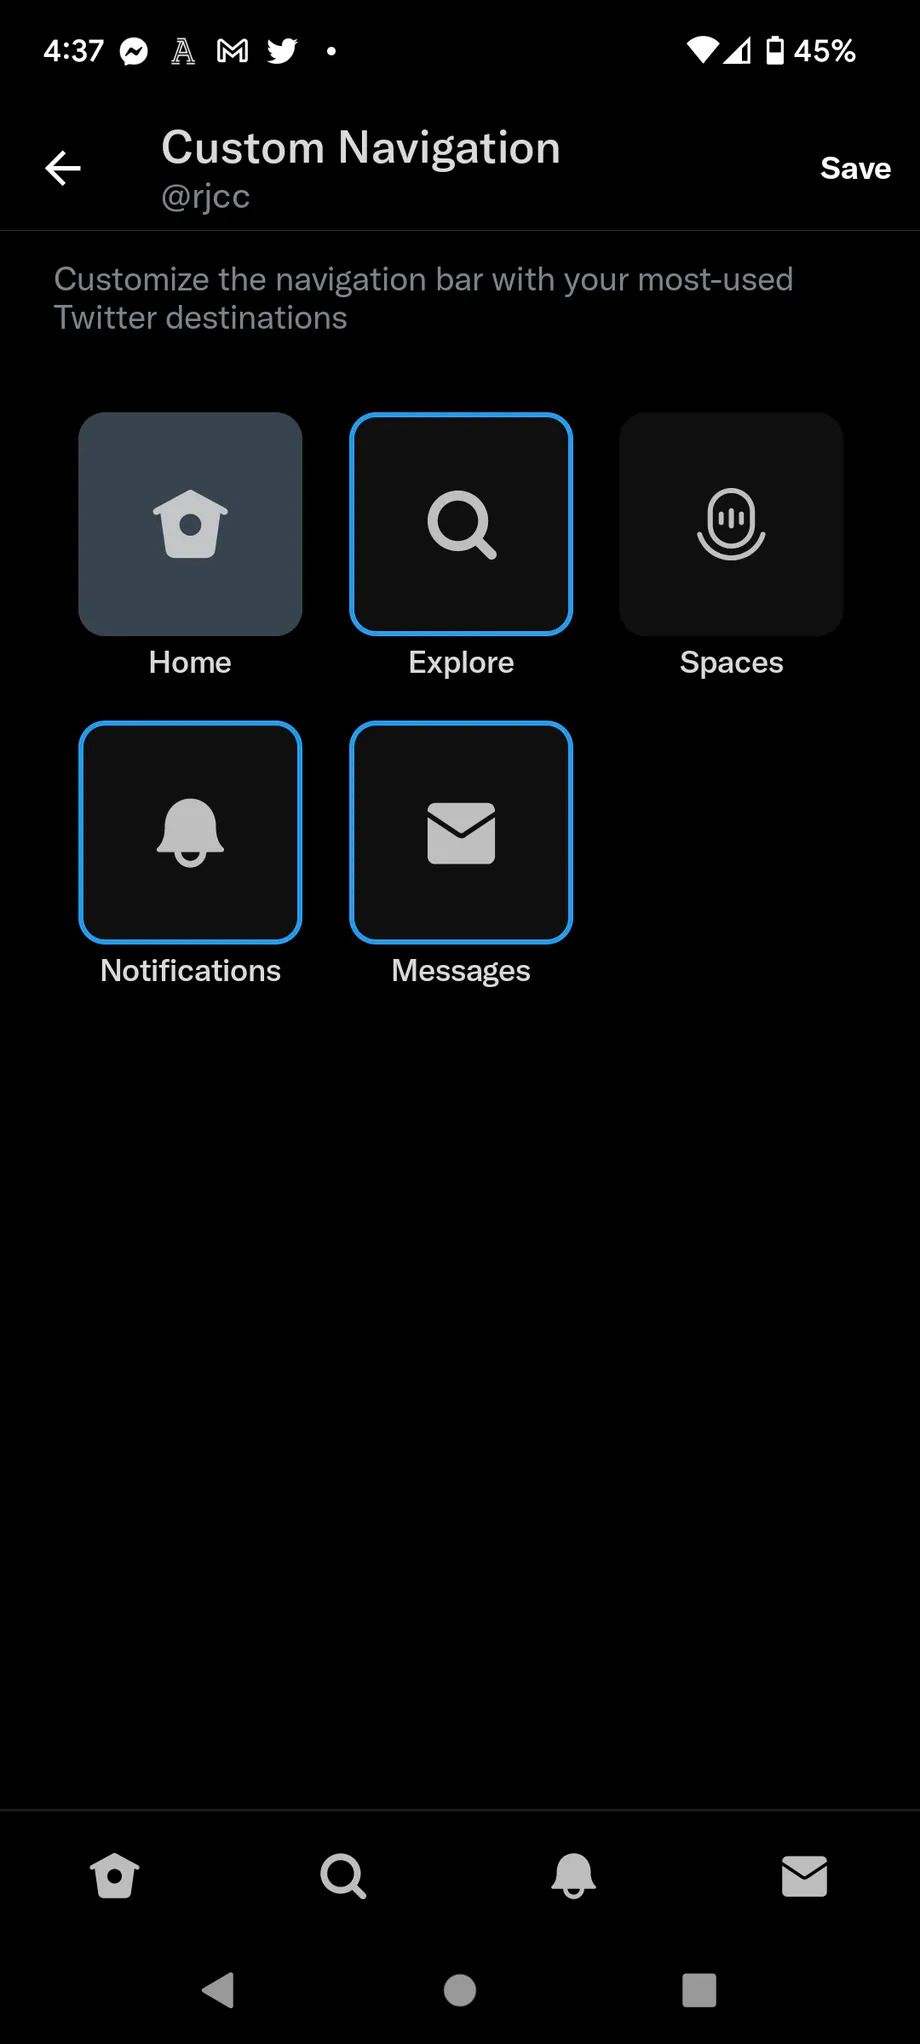 A representation of the Twitter Blue Custom Navigation Android